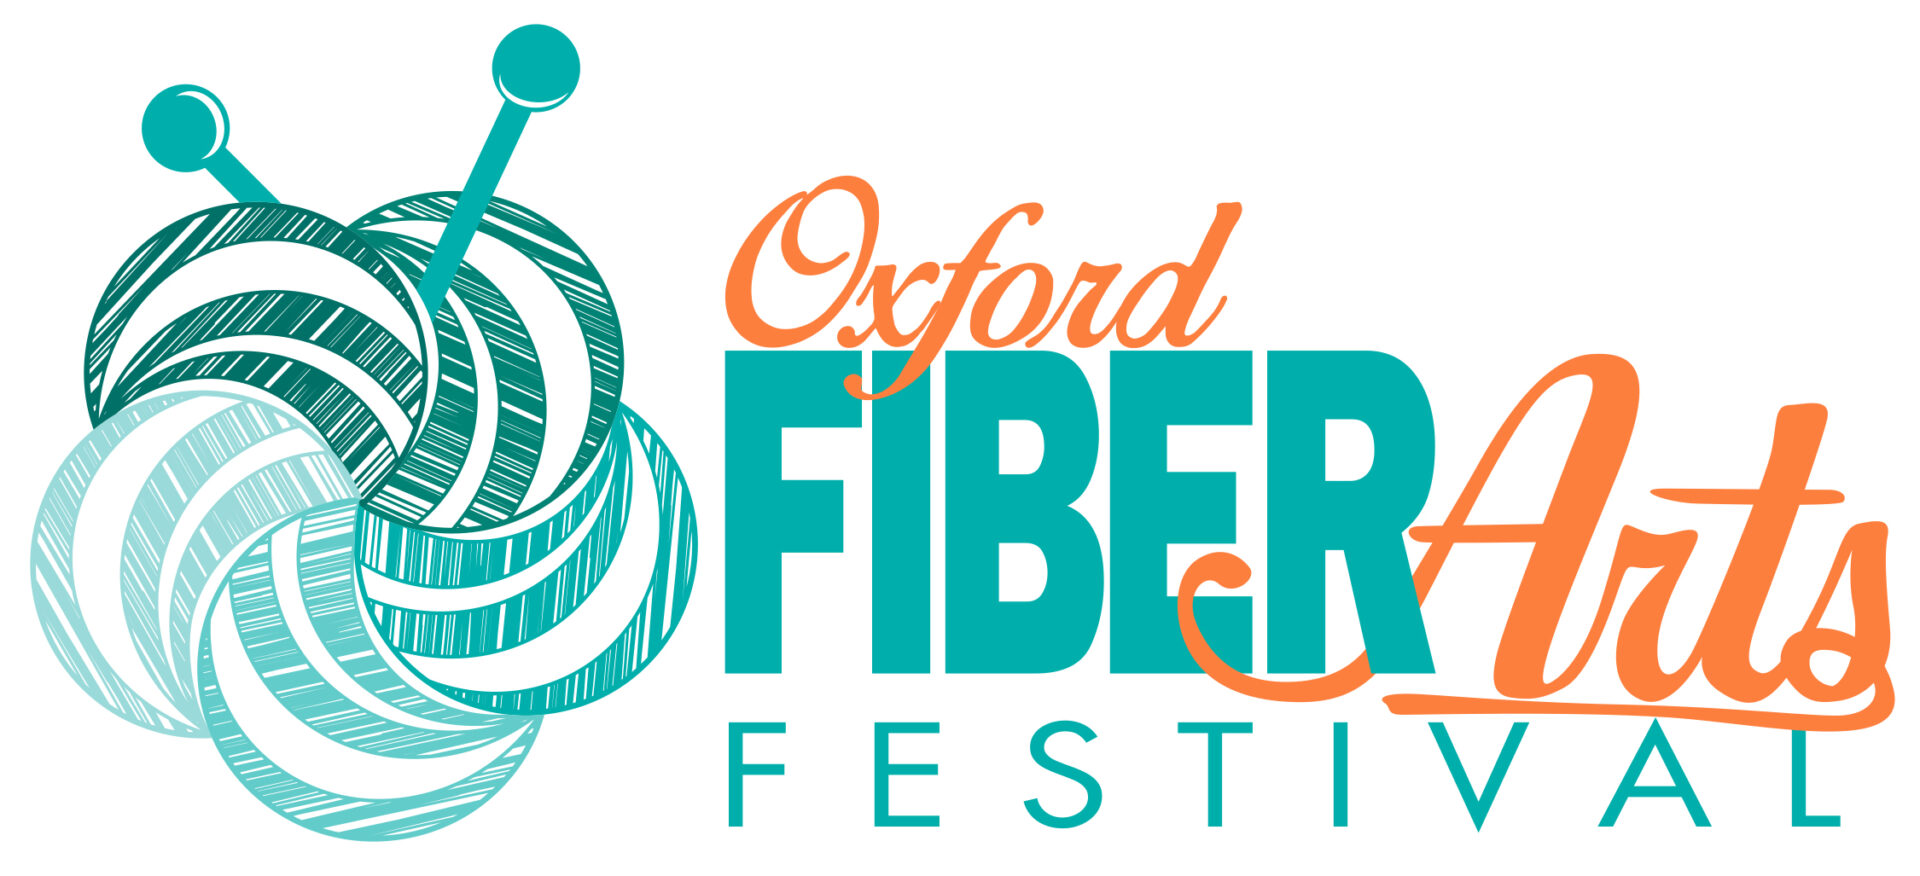 Several Events Planned for Three-Day Oxford Fiber Arts Festival ...